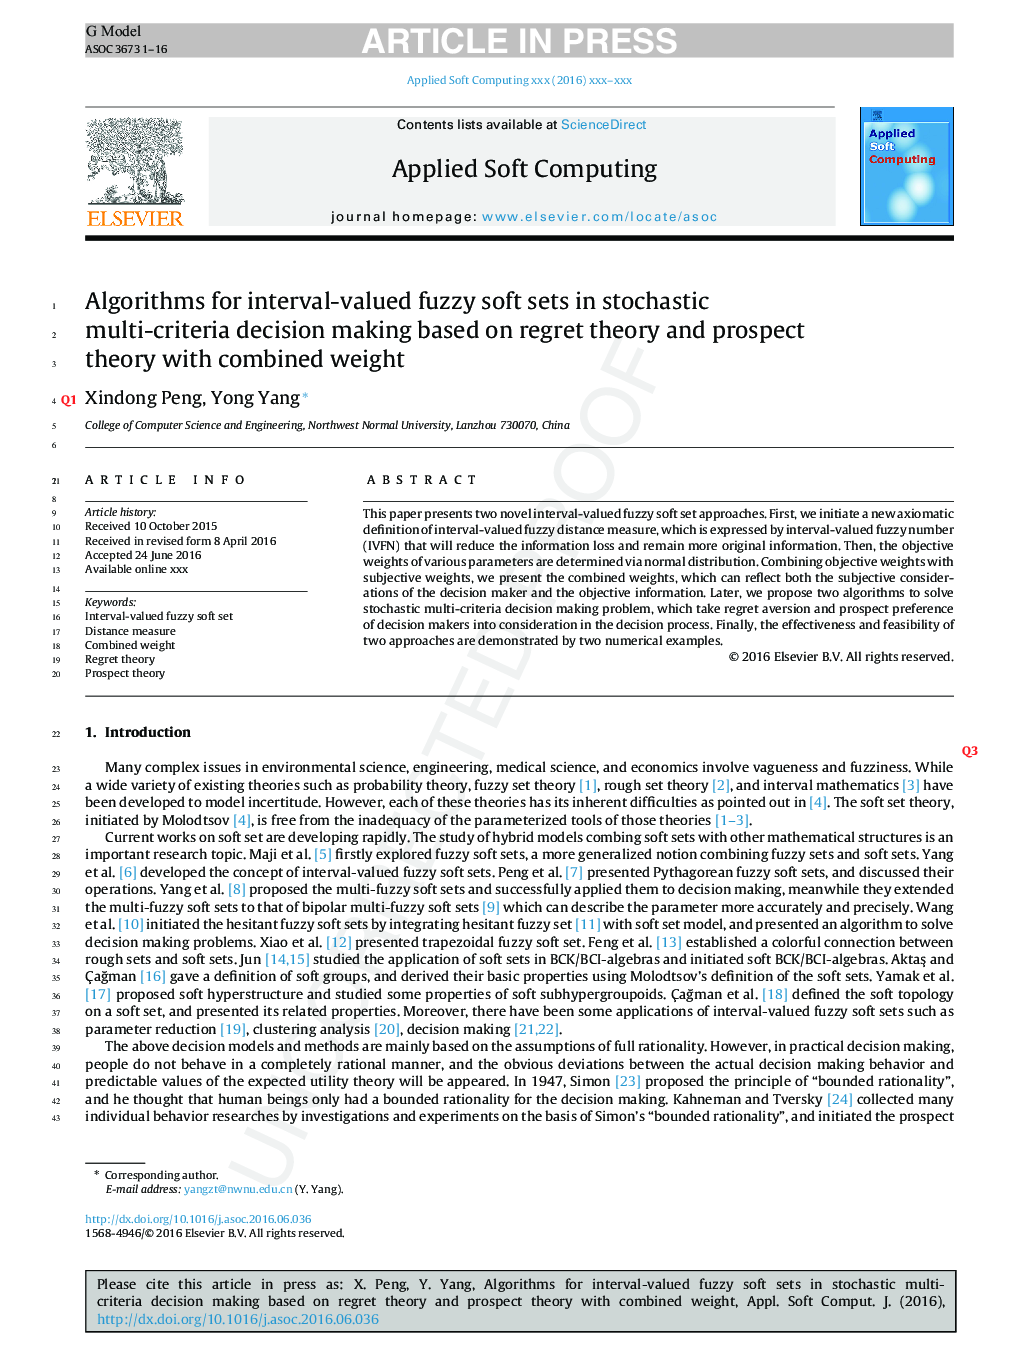 Algorithms for interval-valued fuzzy soft sets in stochastic multi-criteria decision making based on regret theory and prospect theory with combined weight